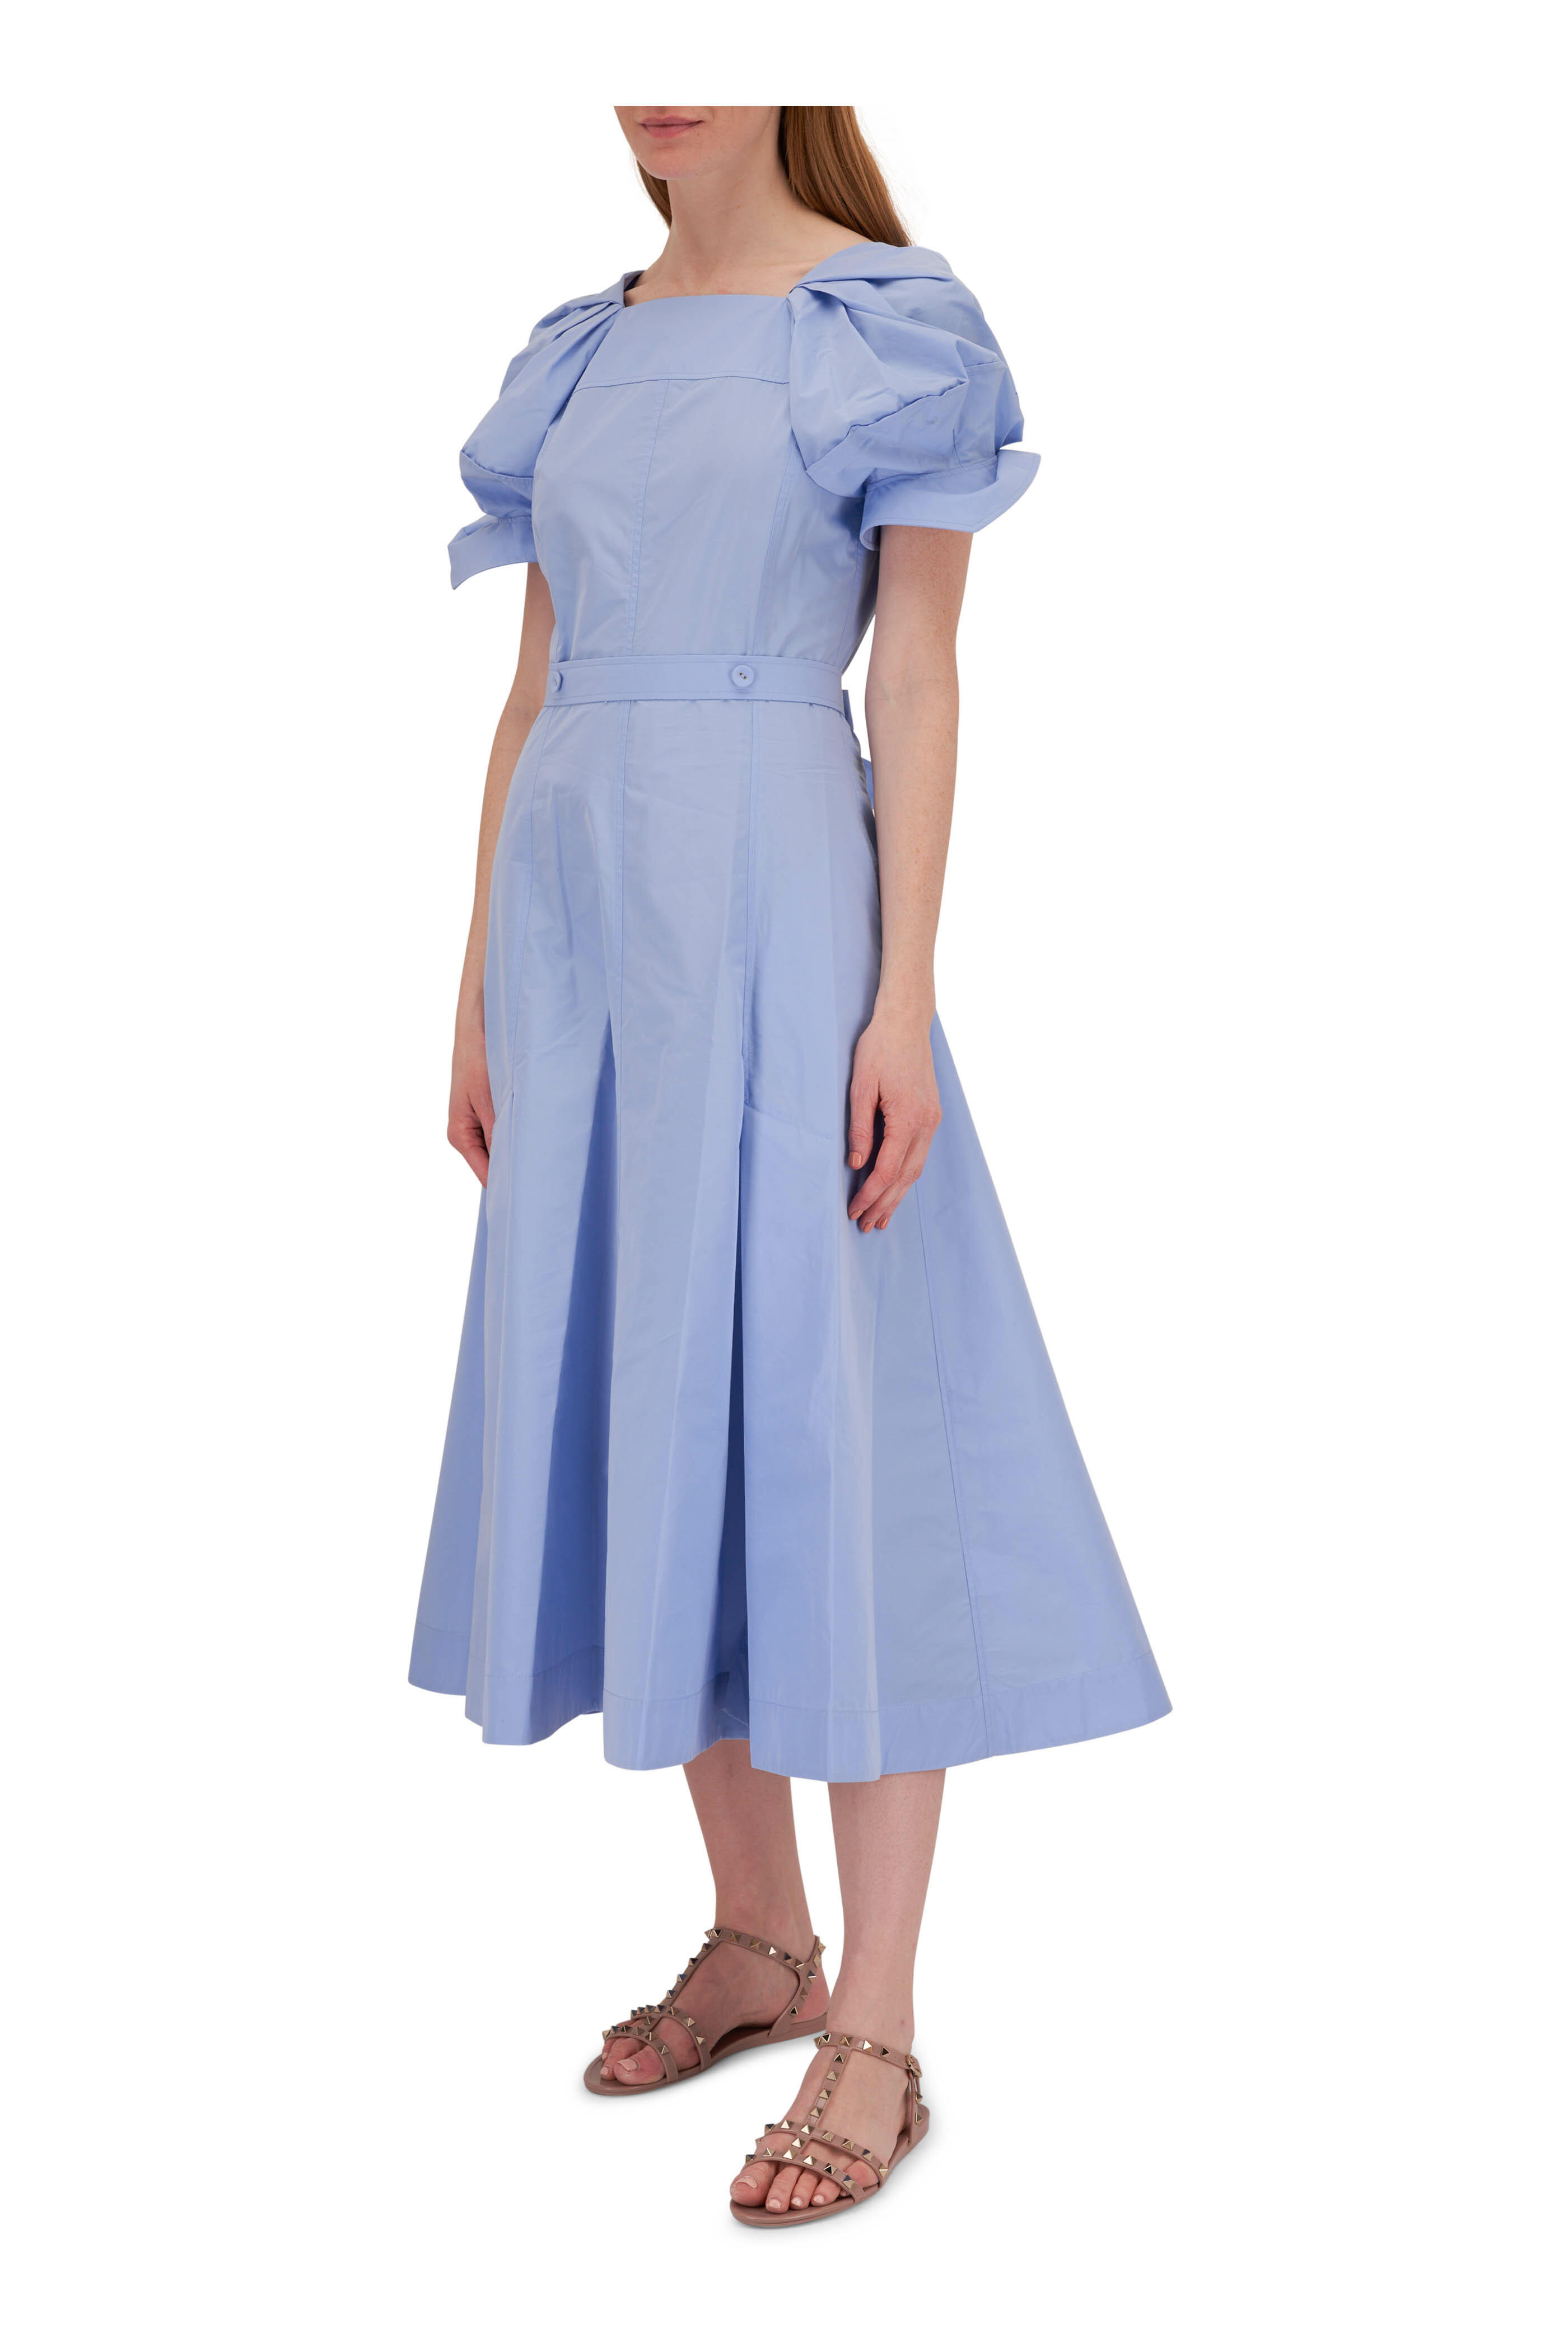 3.1 Phillip Lim - Oxford Blue Collapsed Bloom Sleeve Belted Dress